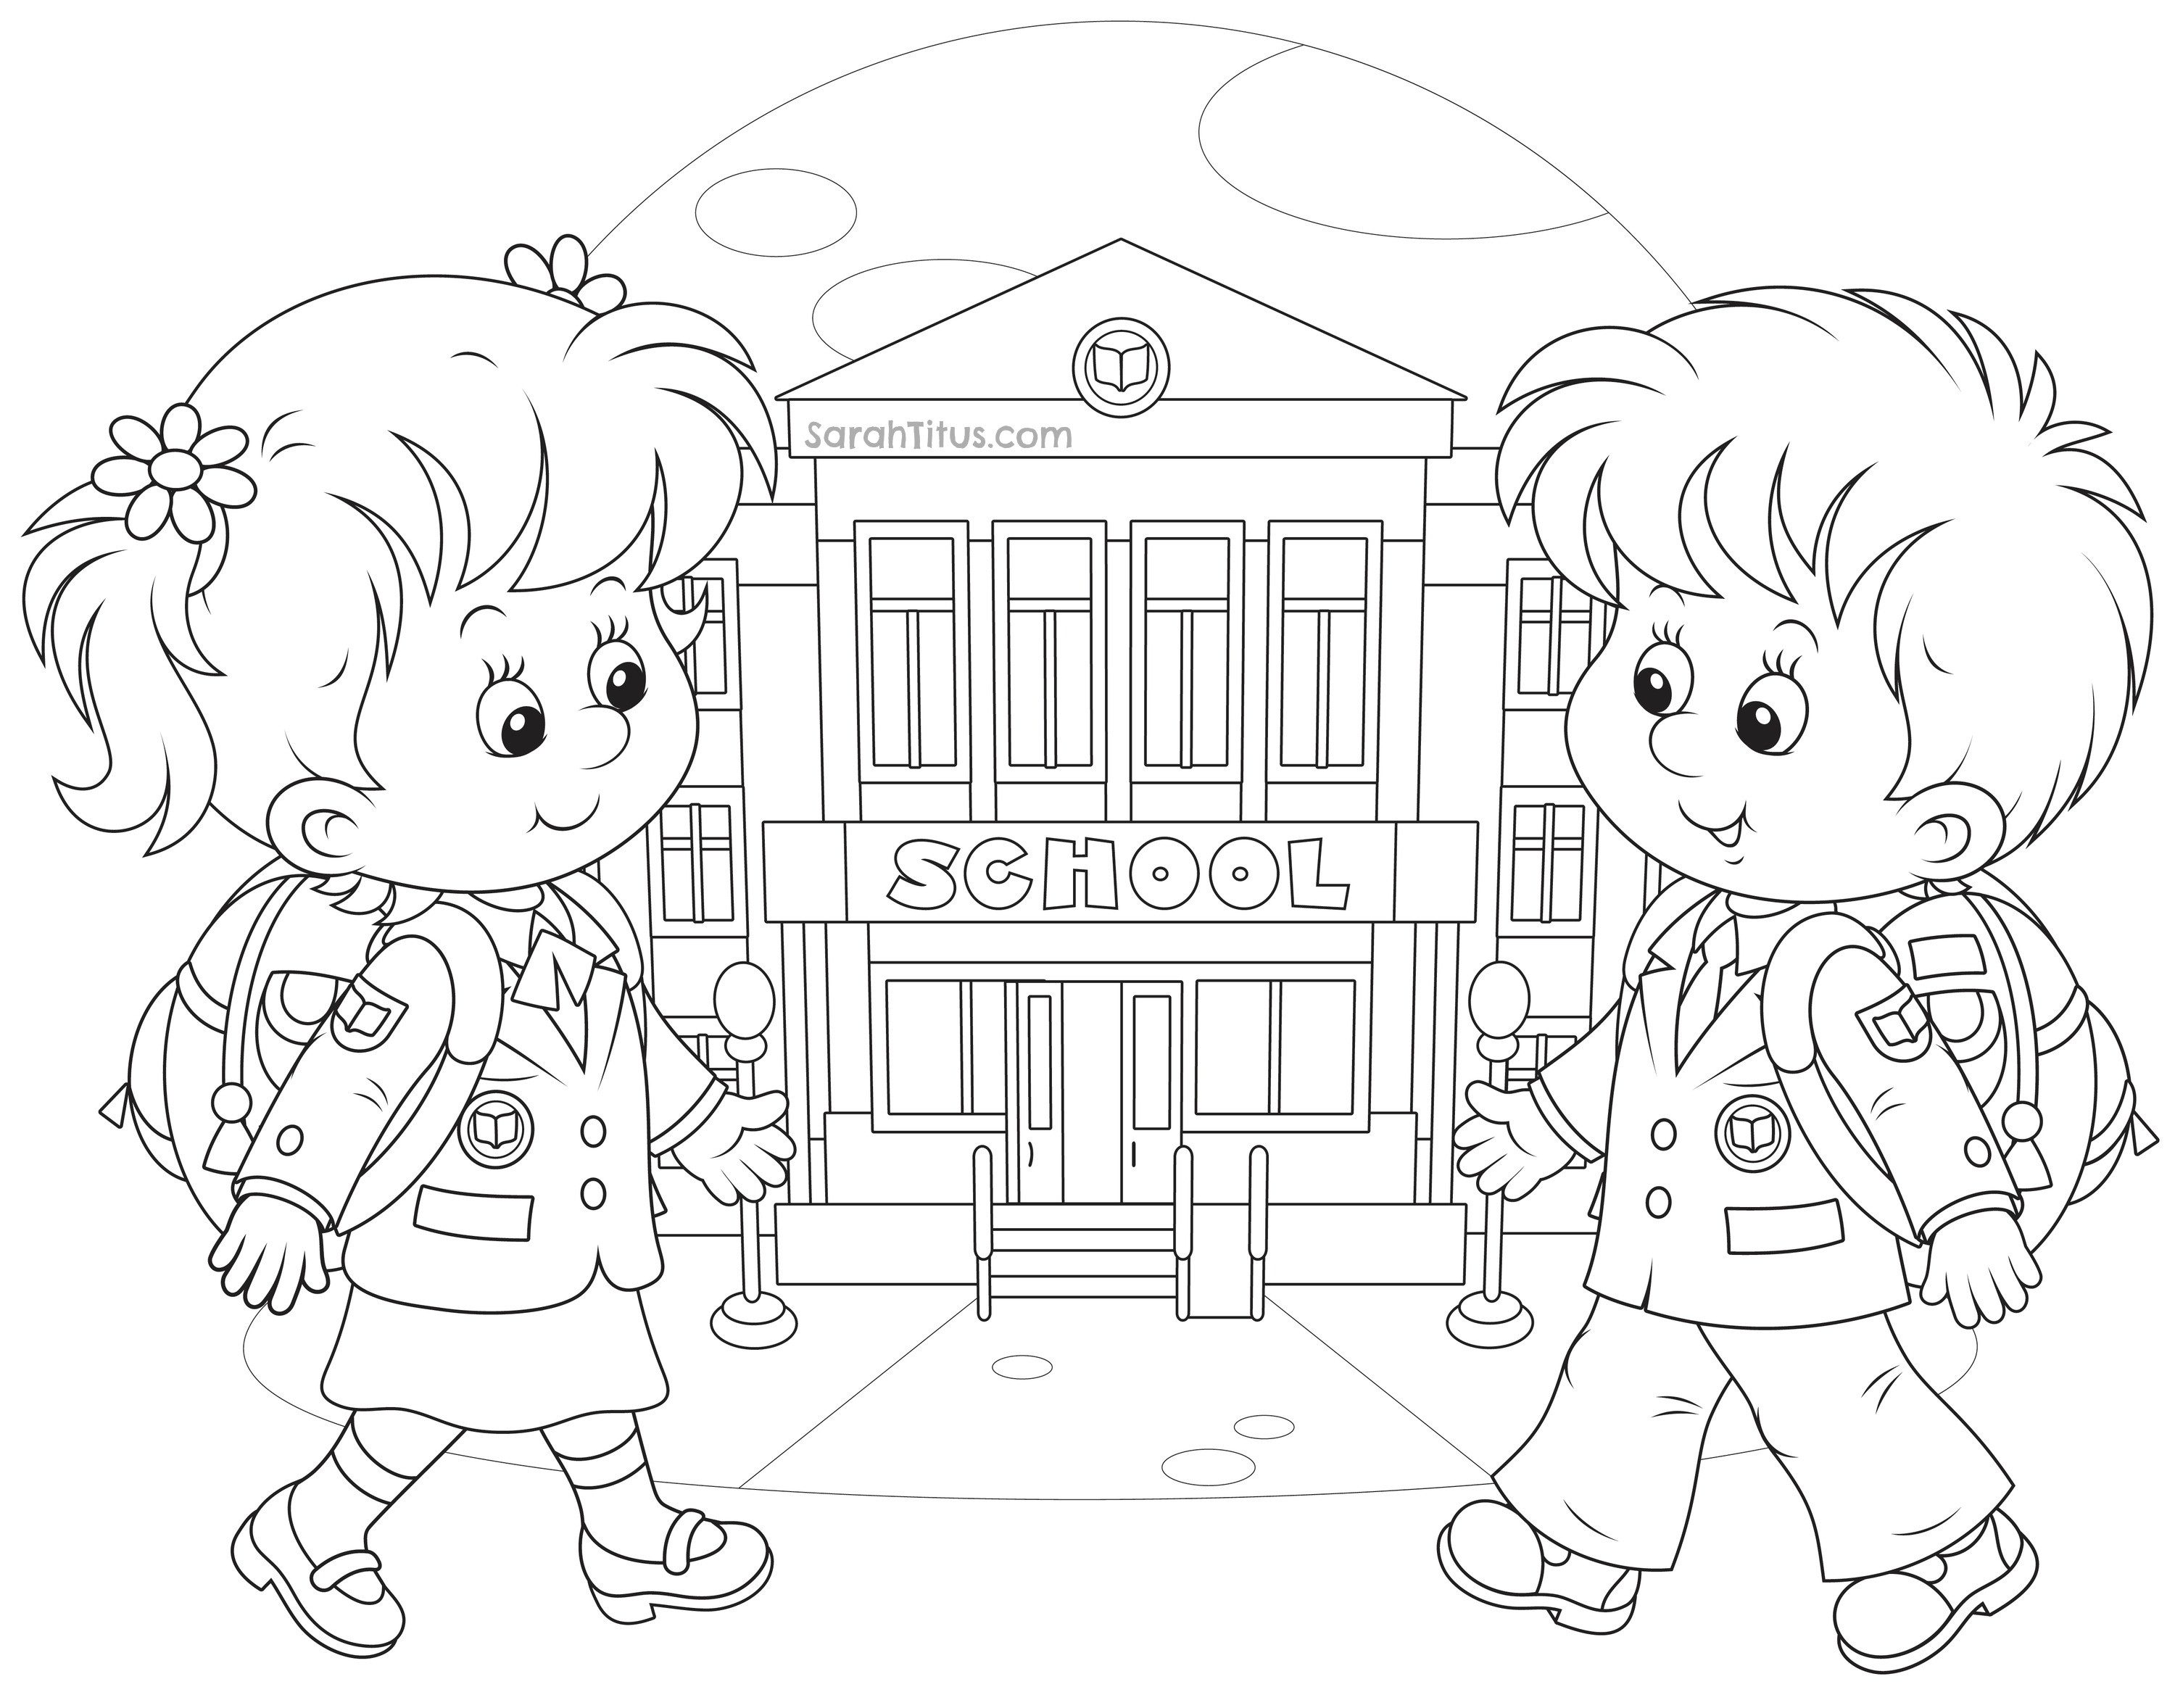 College Coloring Pages
 Back to School Coloring Pages Sarah Titus